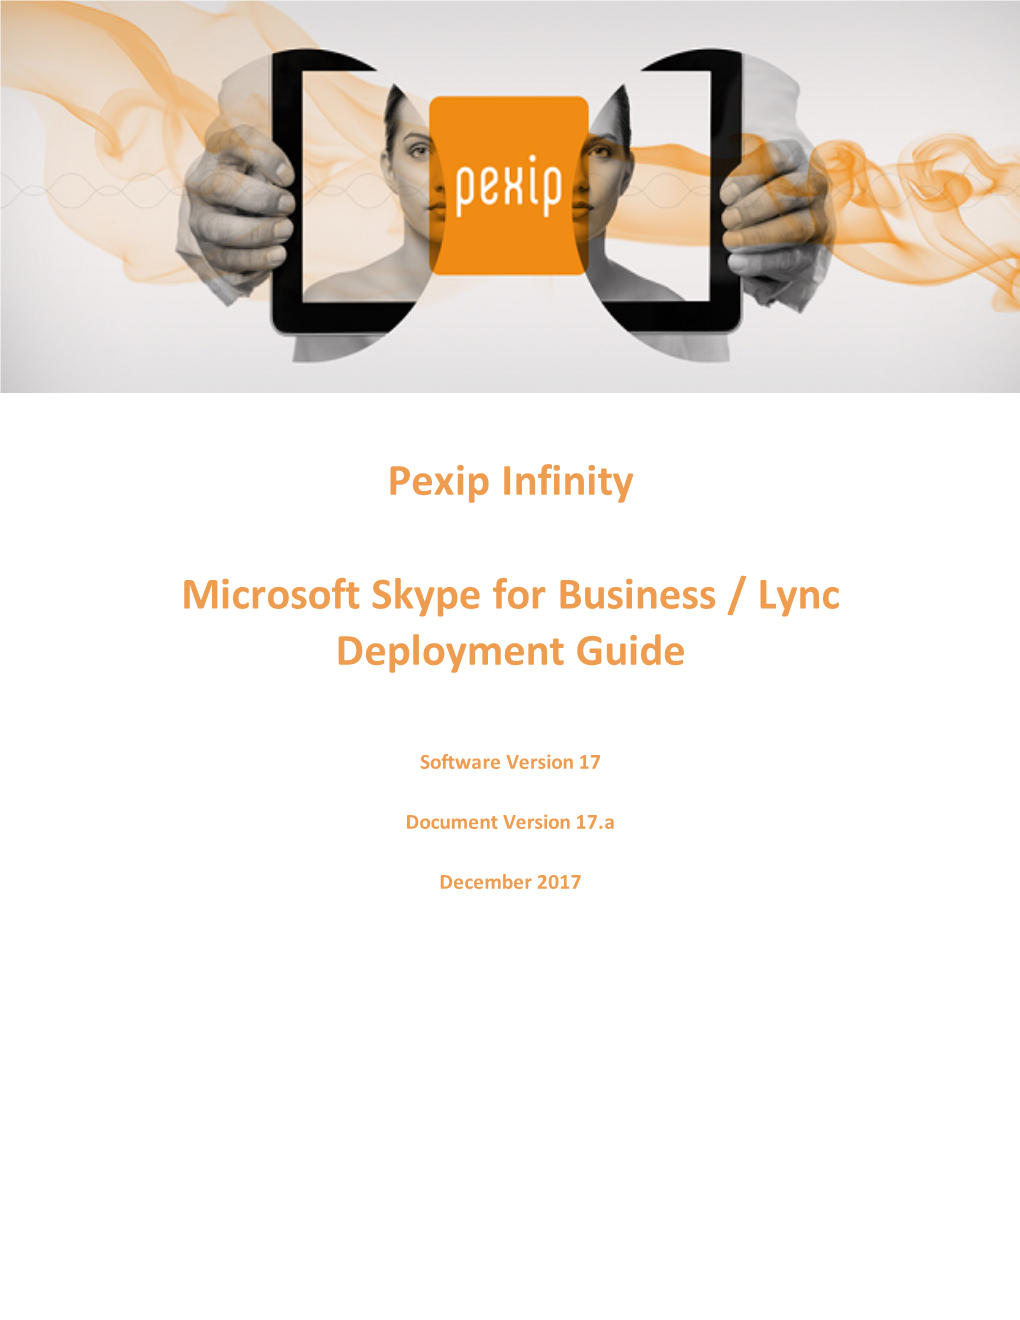 Pexip Infinity and Microsoft Skype for Business / Lync Deployment Guide